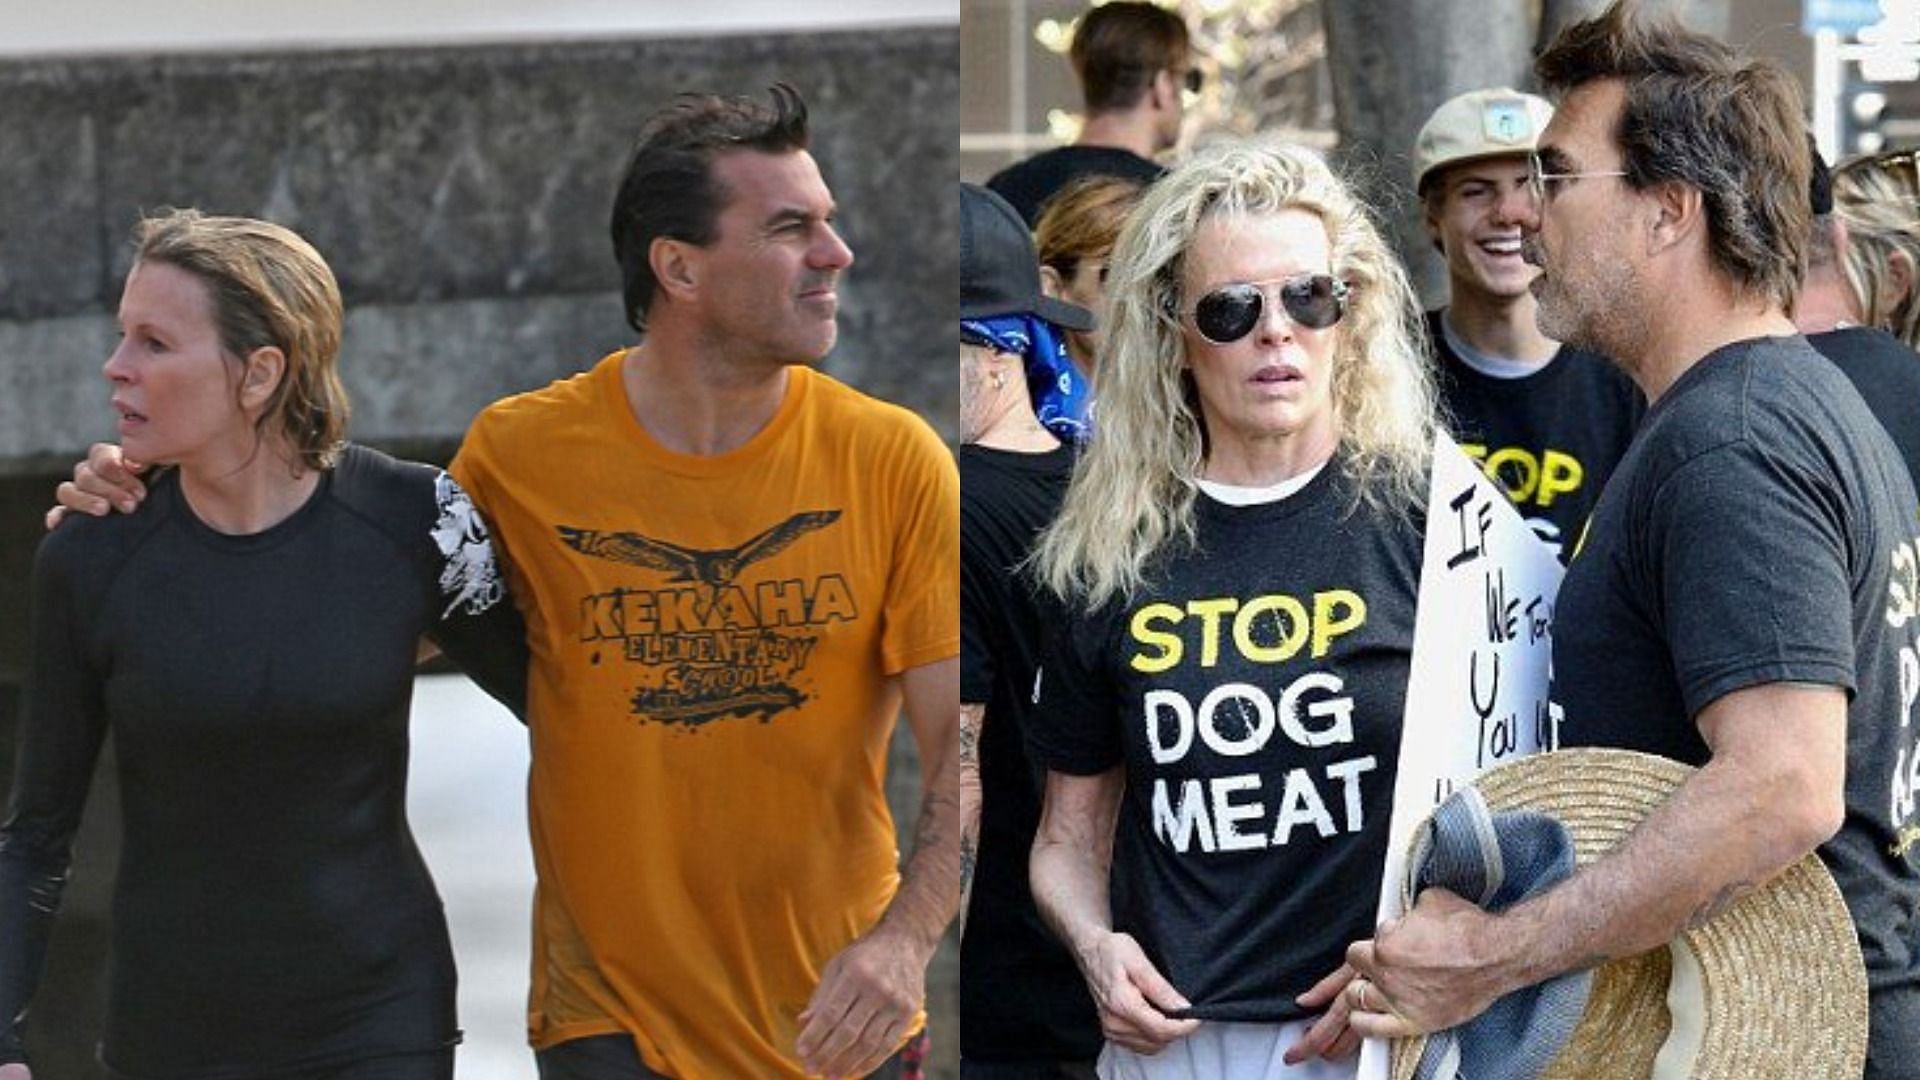 Basinger and Stone have been together since 2014 (Images via Splash News and Apex)